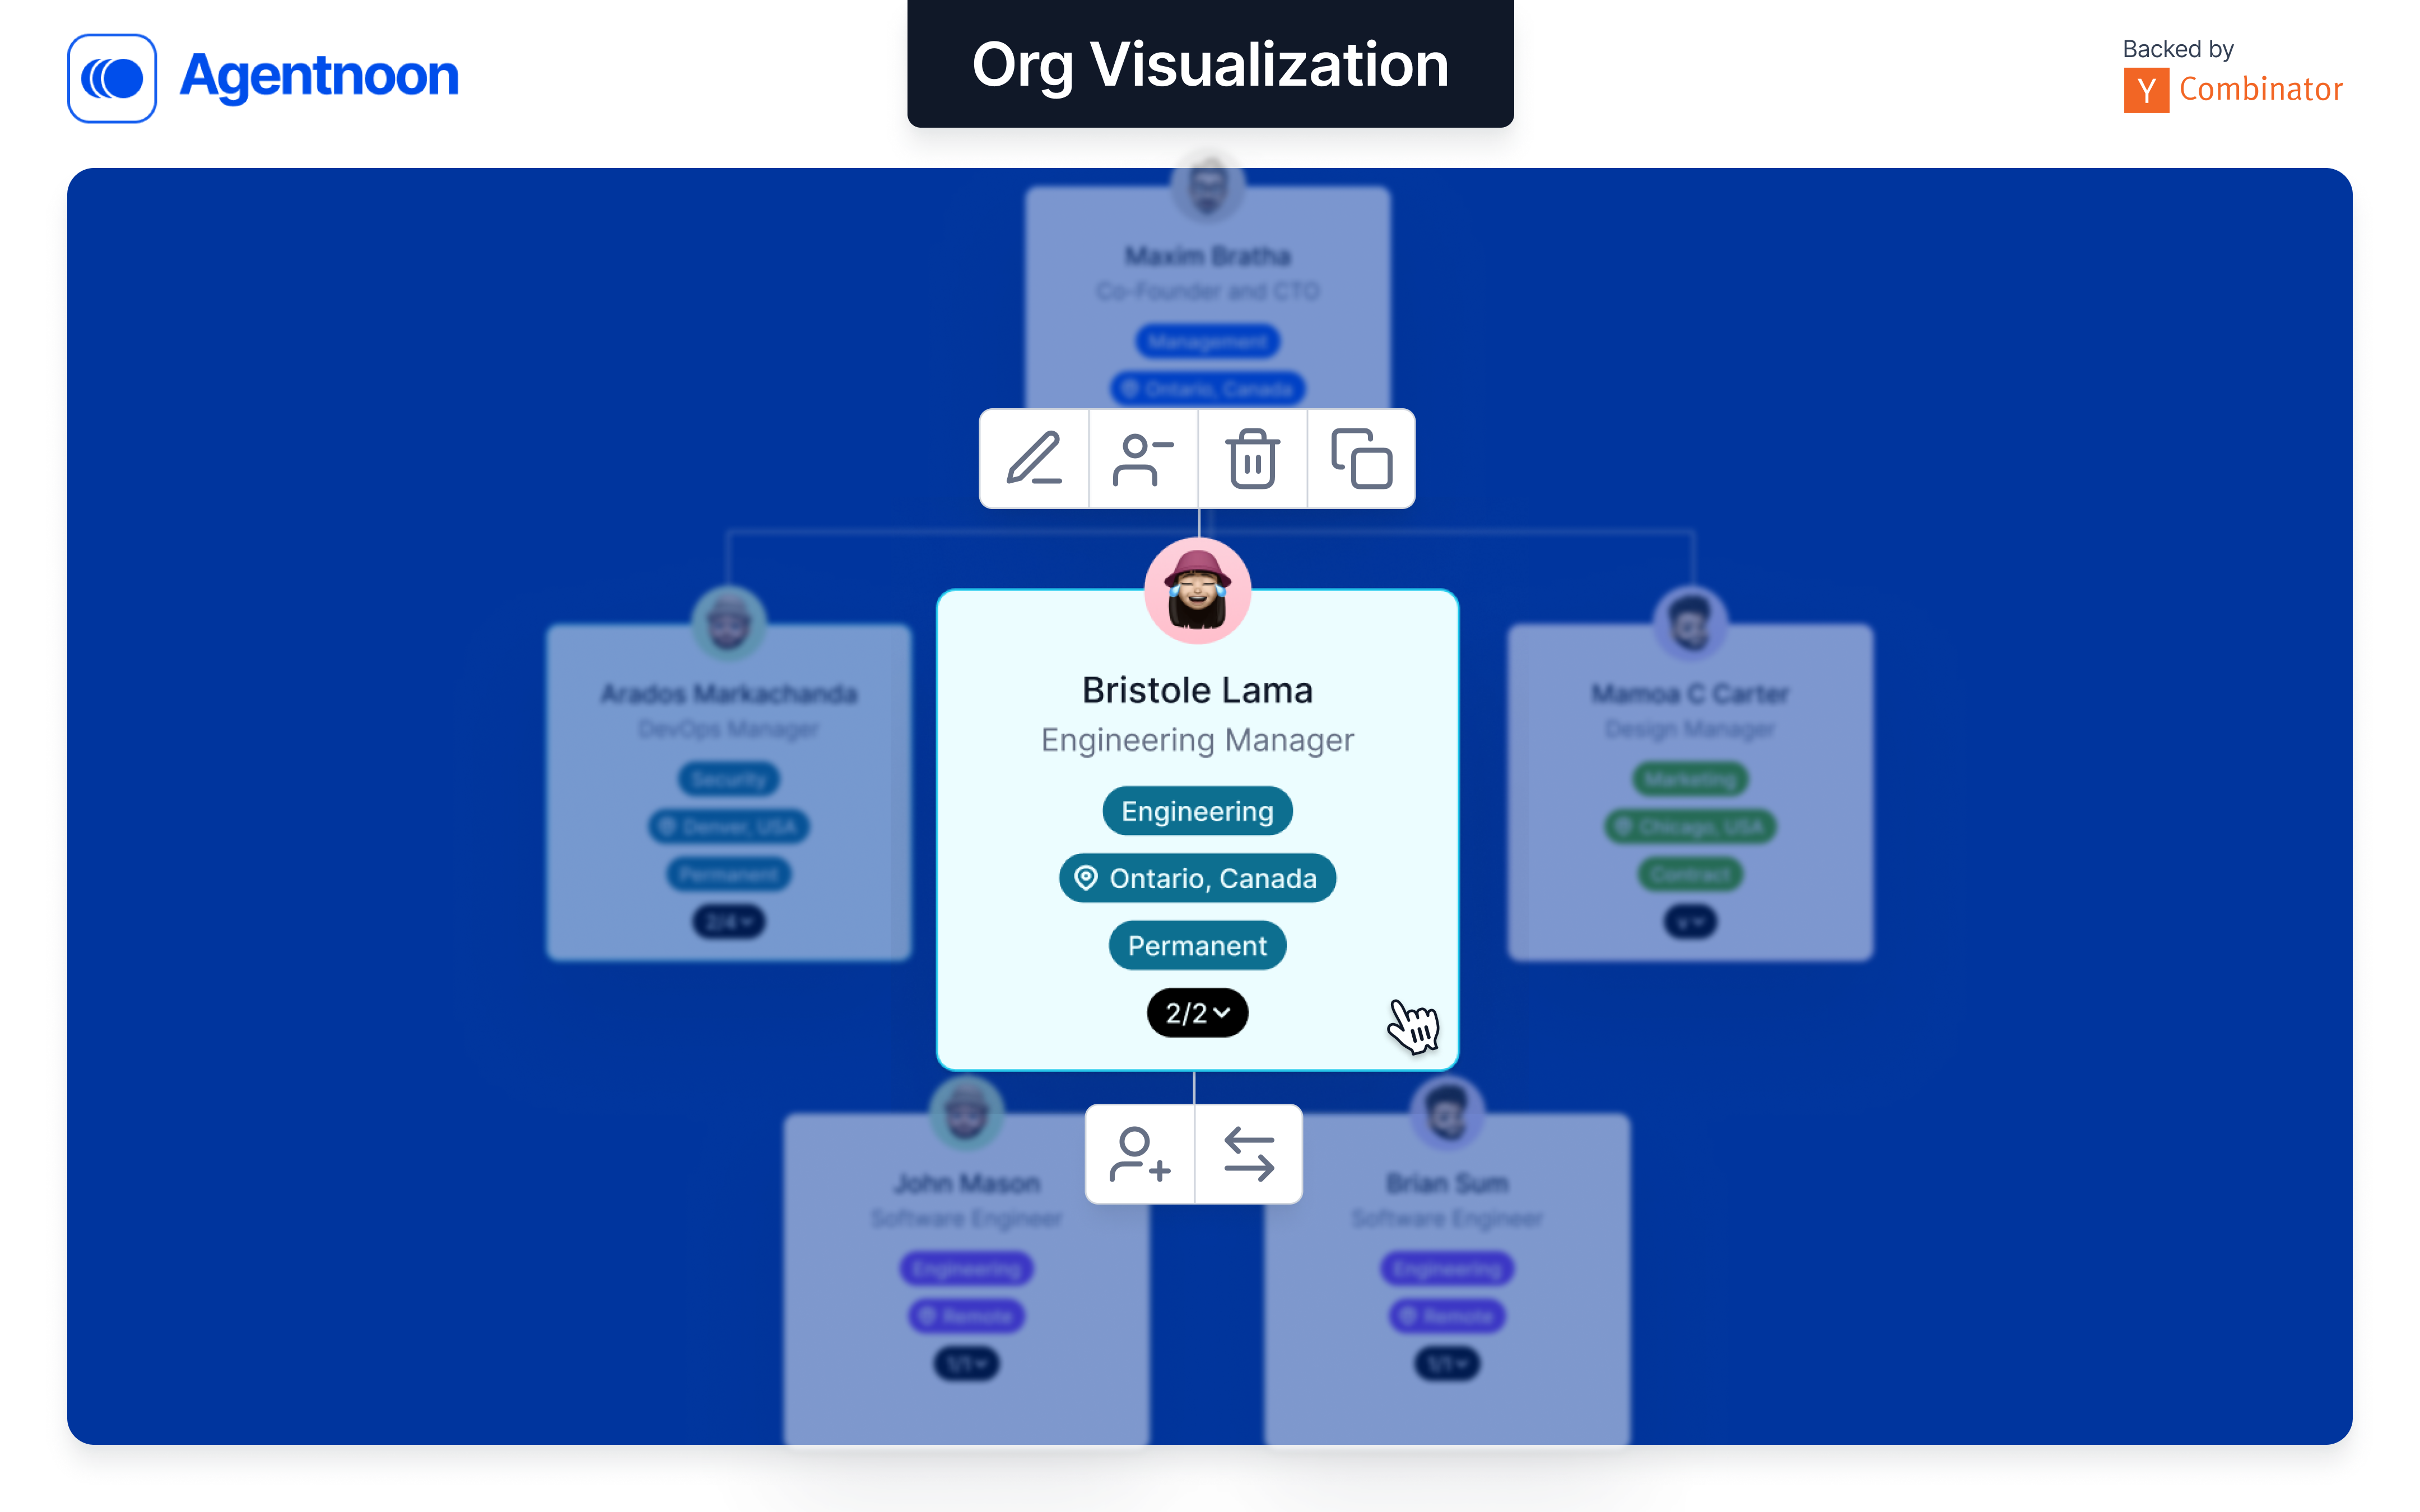 Save time making org charts. Visualize all your people data in one place.